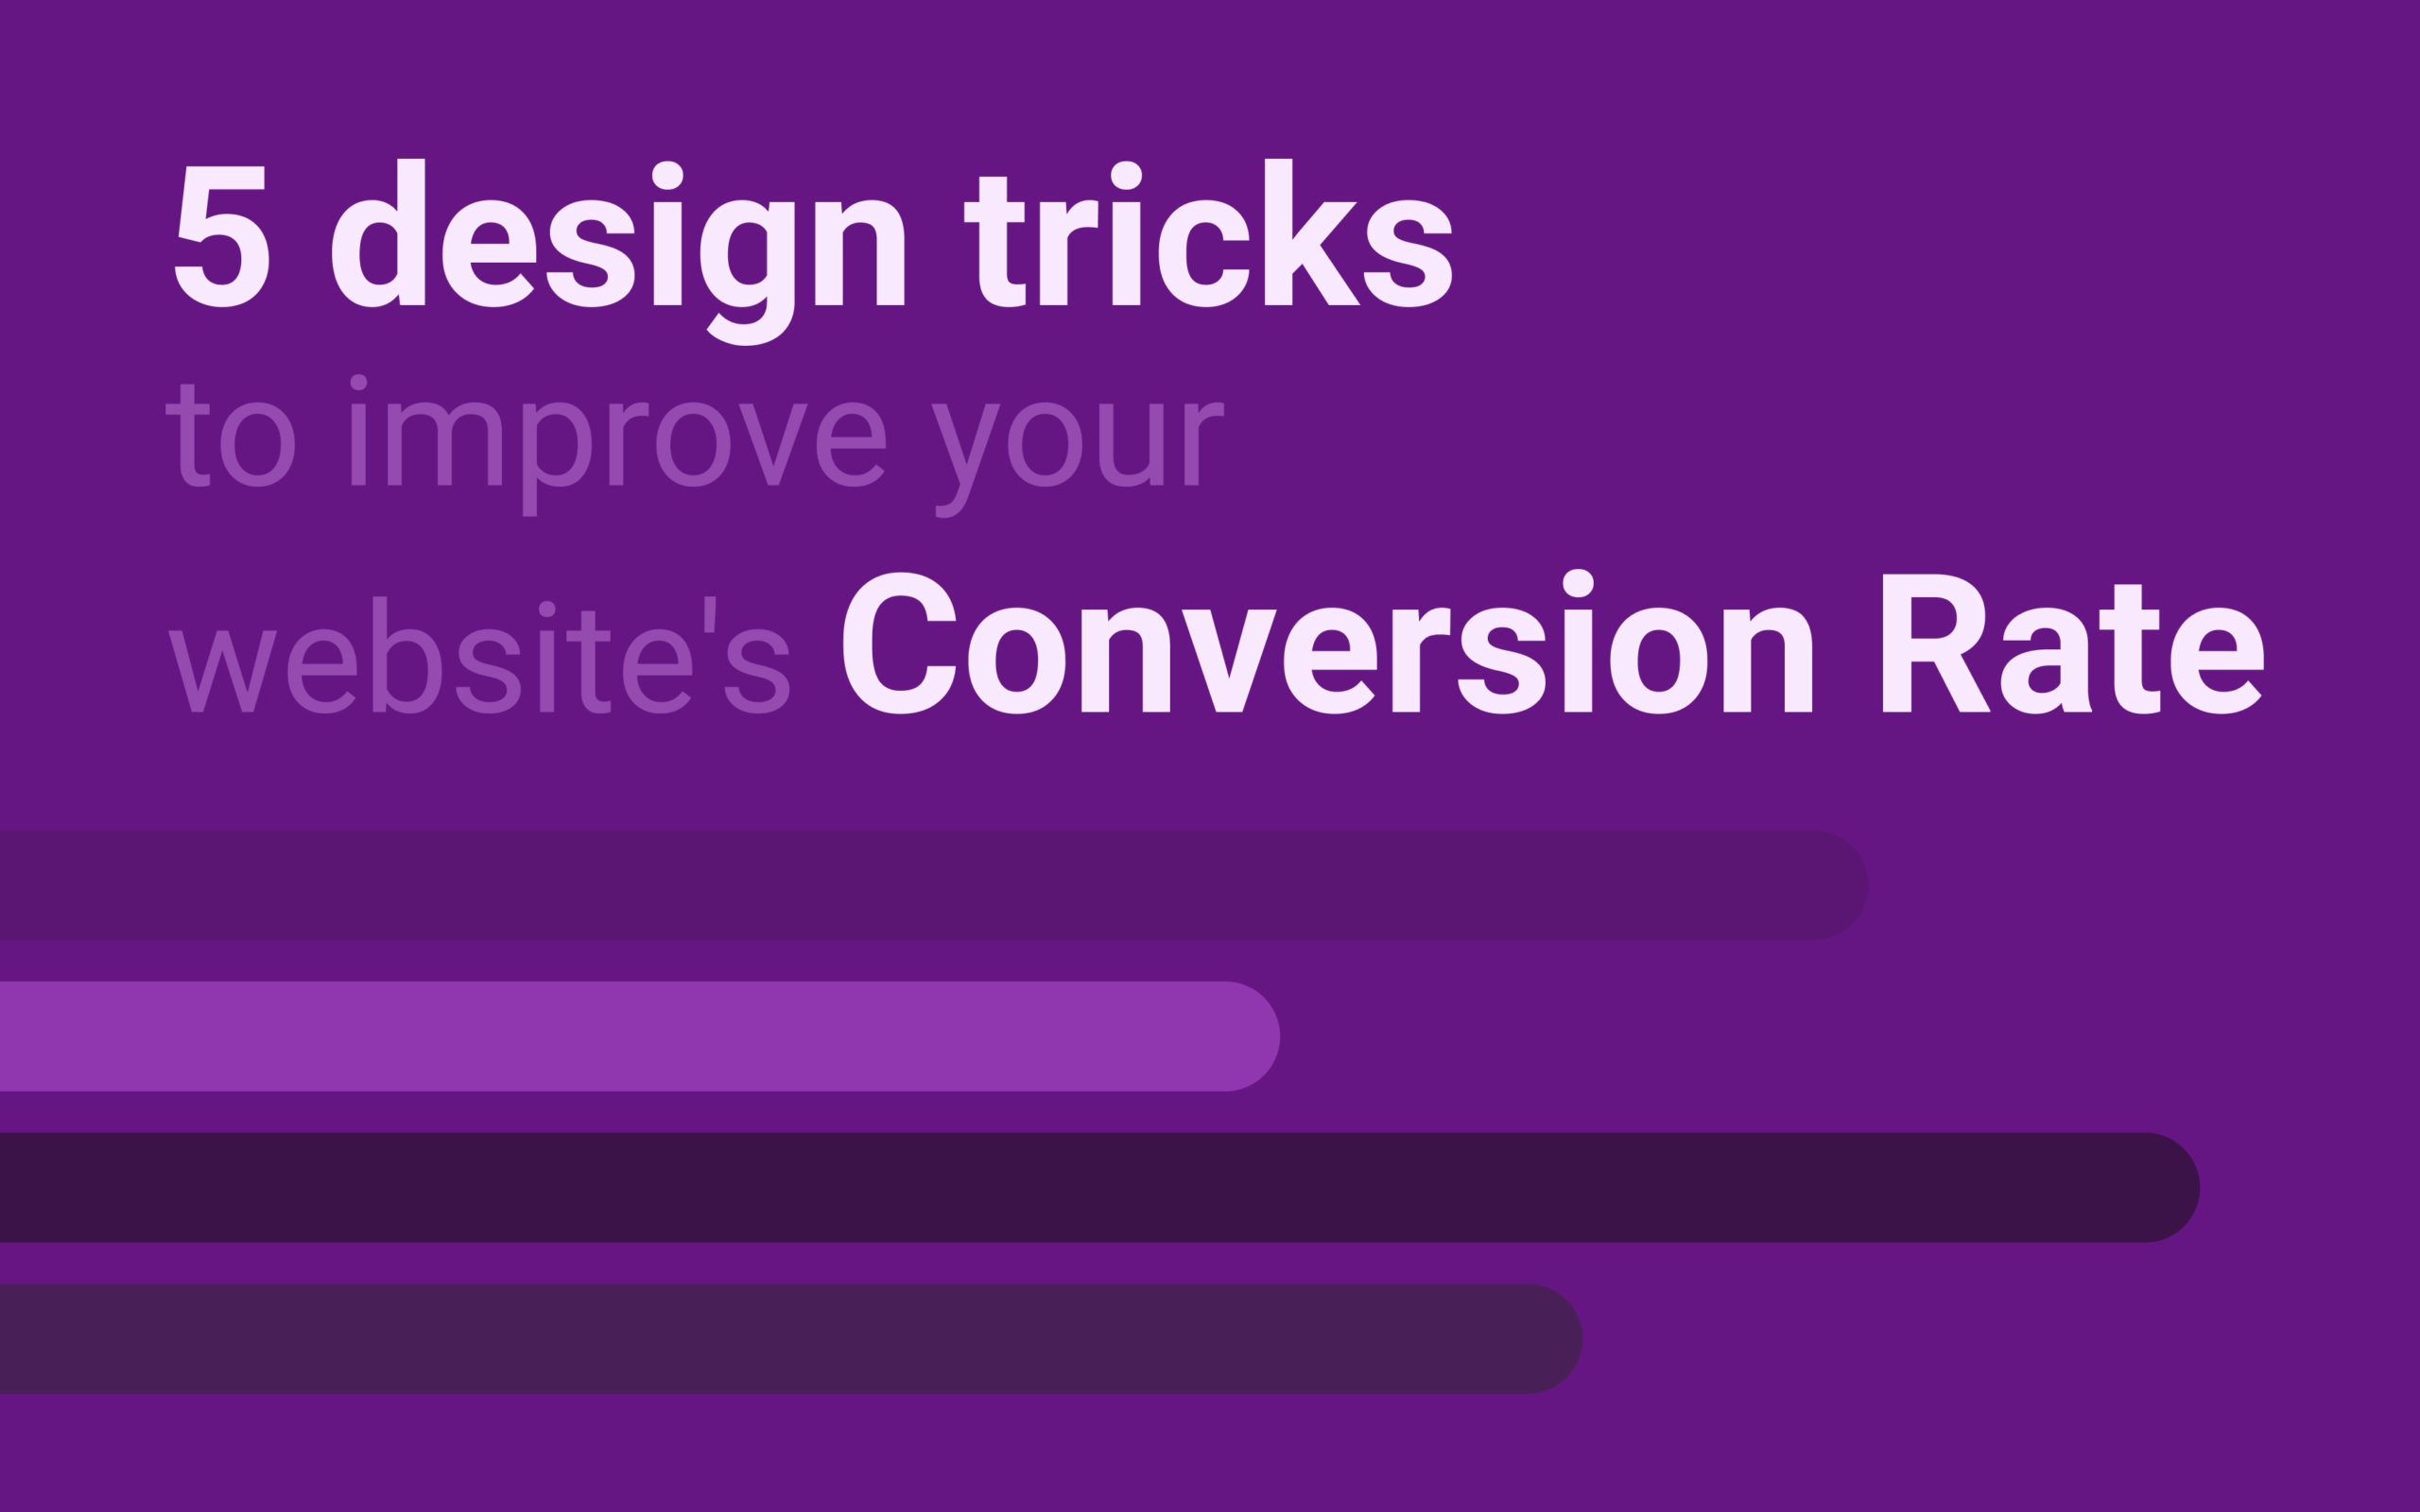 5 design tricks to improve your conversion rate